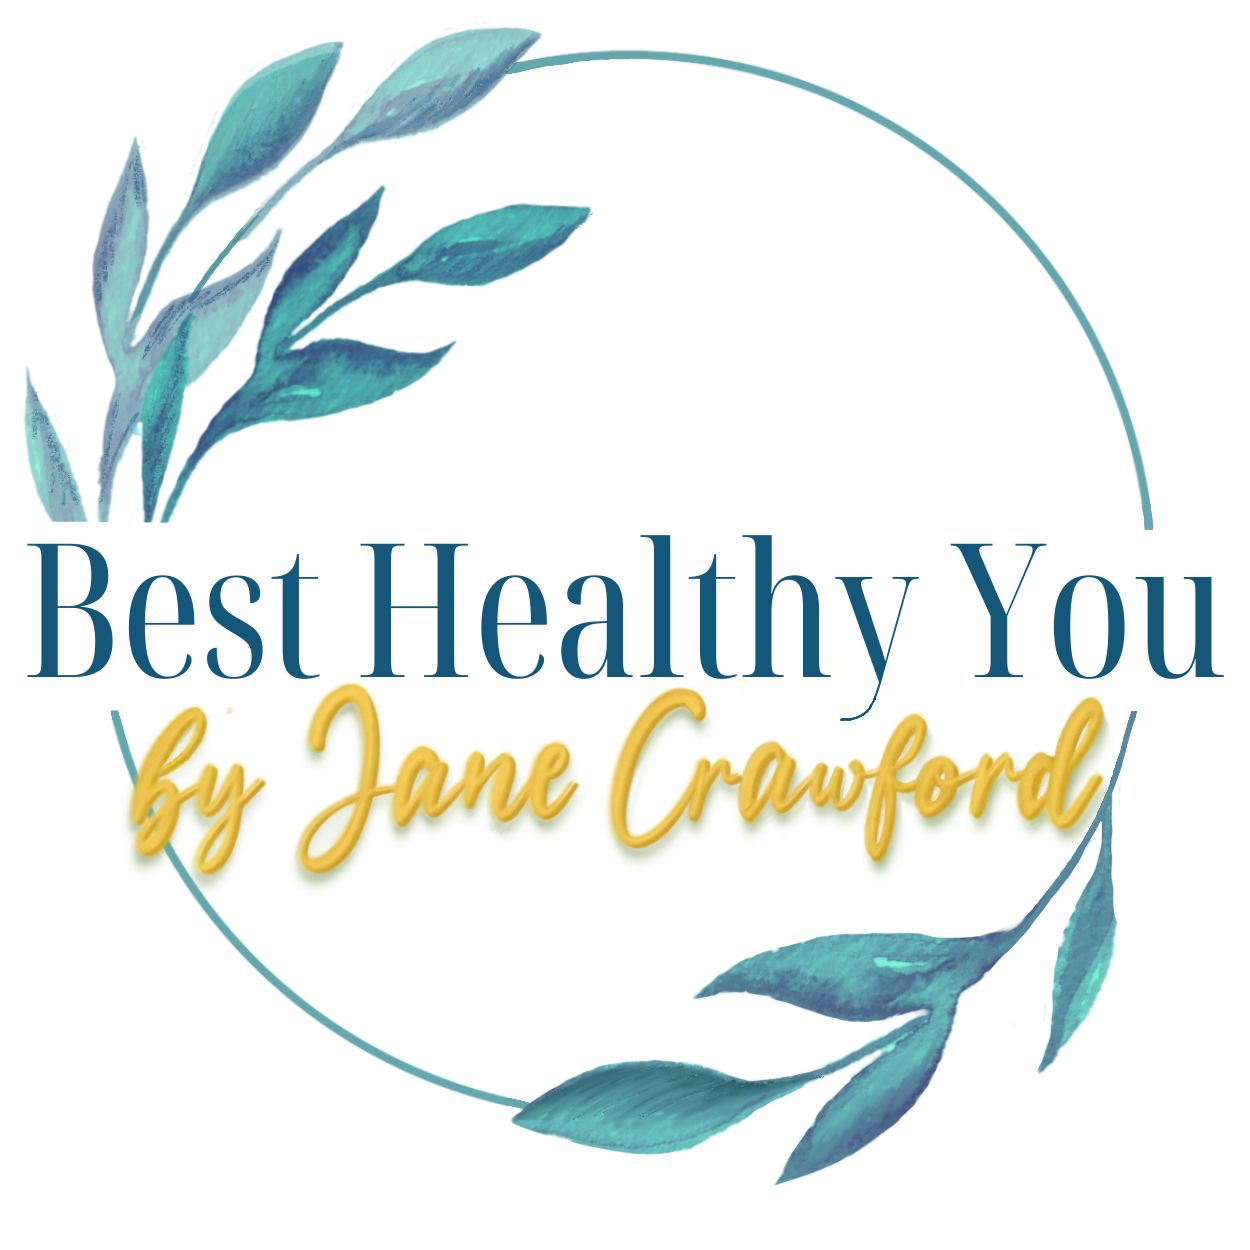 Best Healthy You